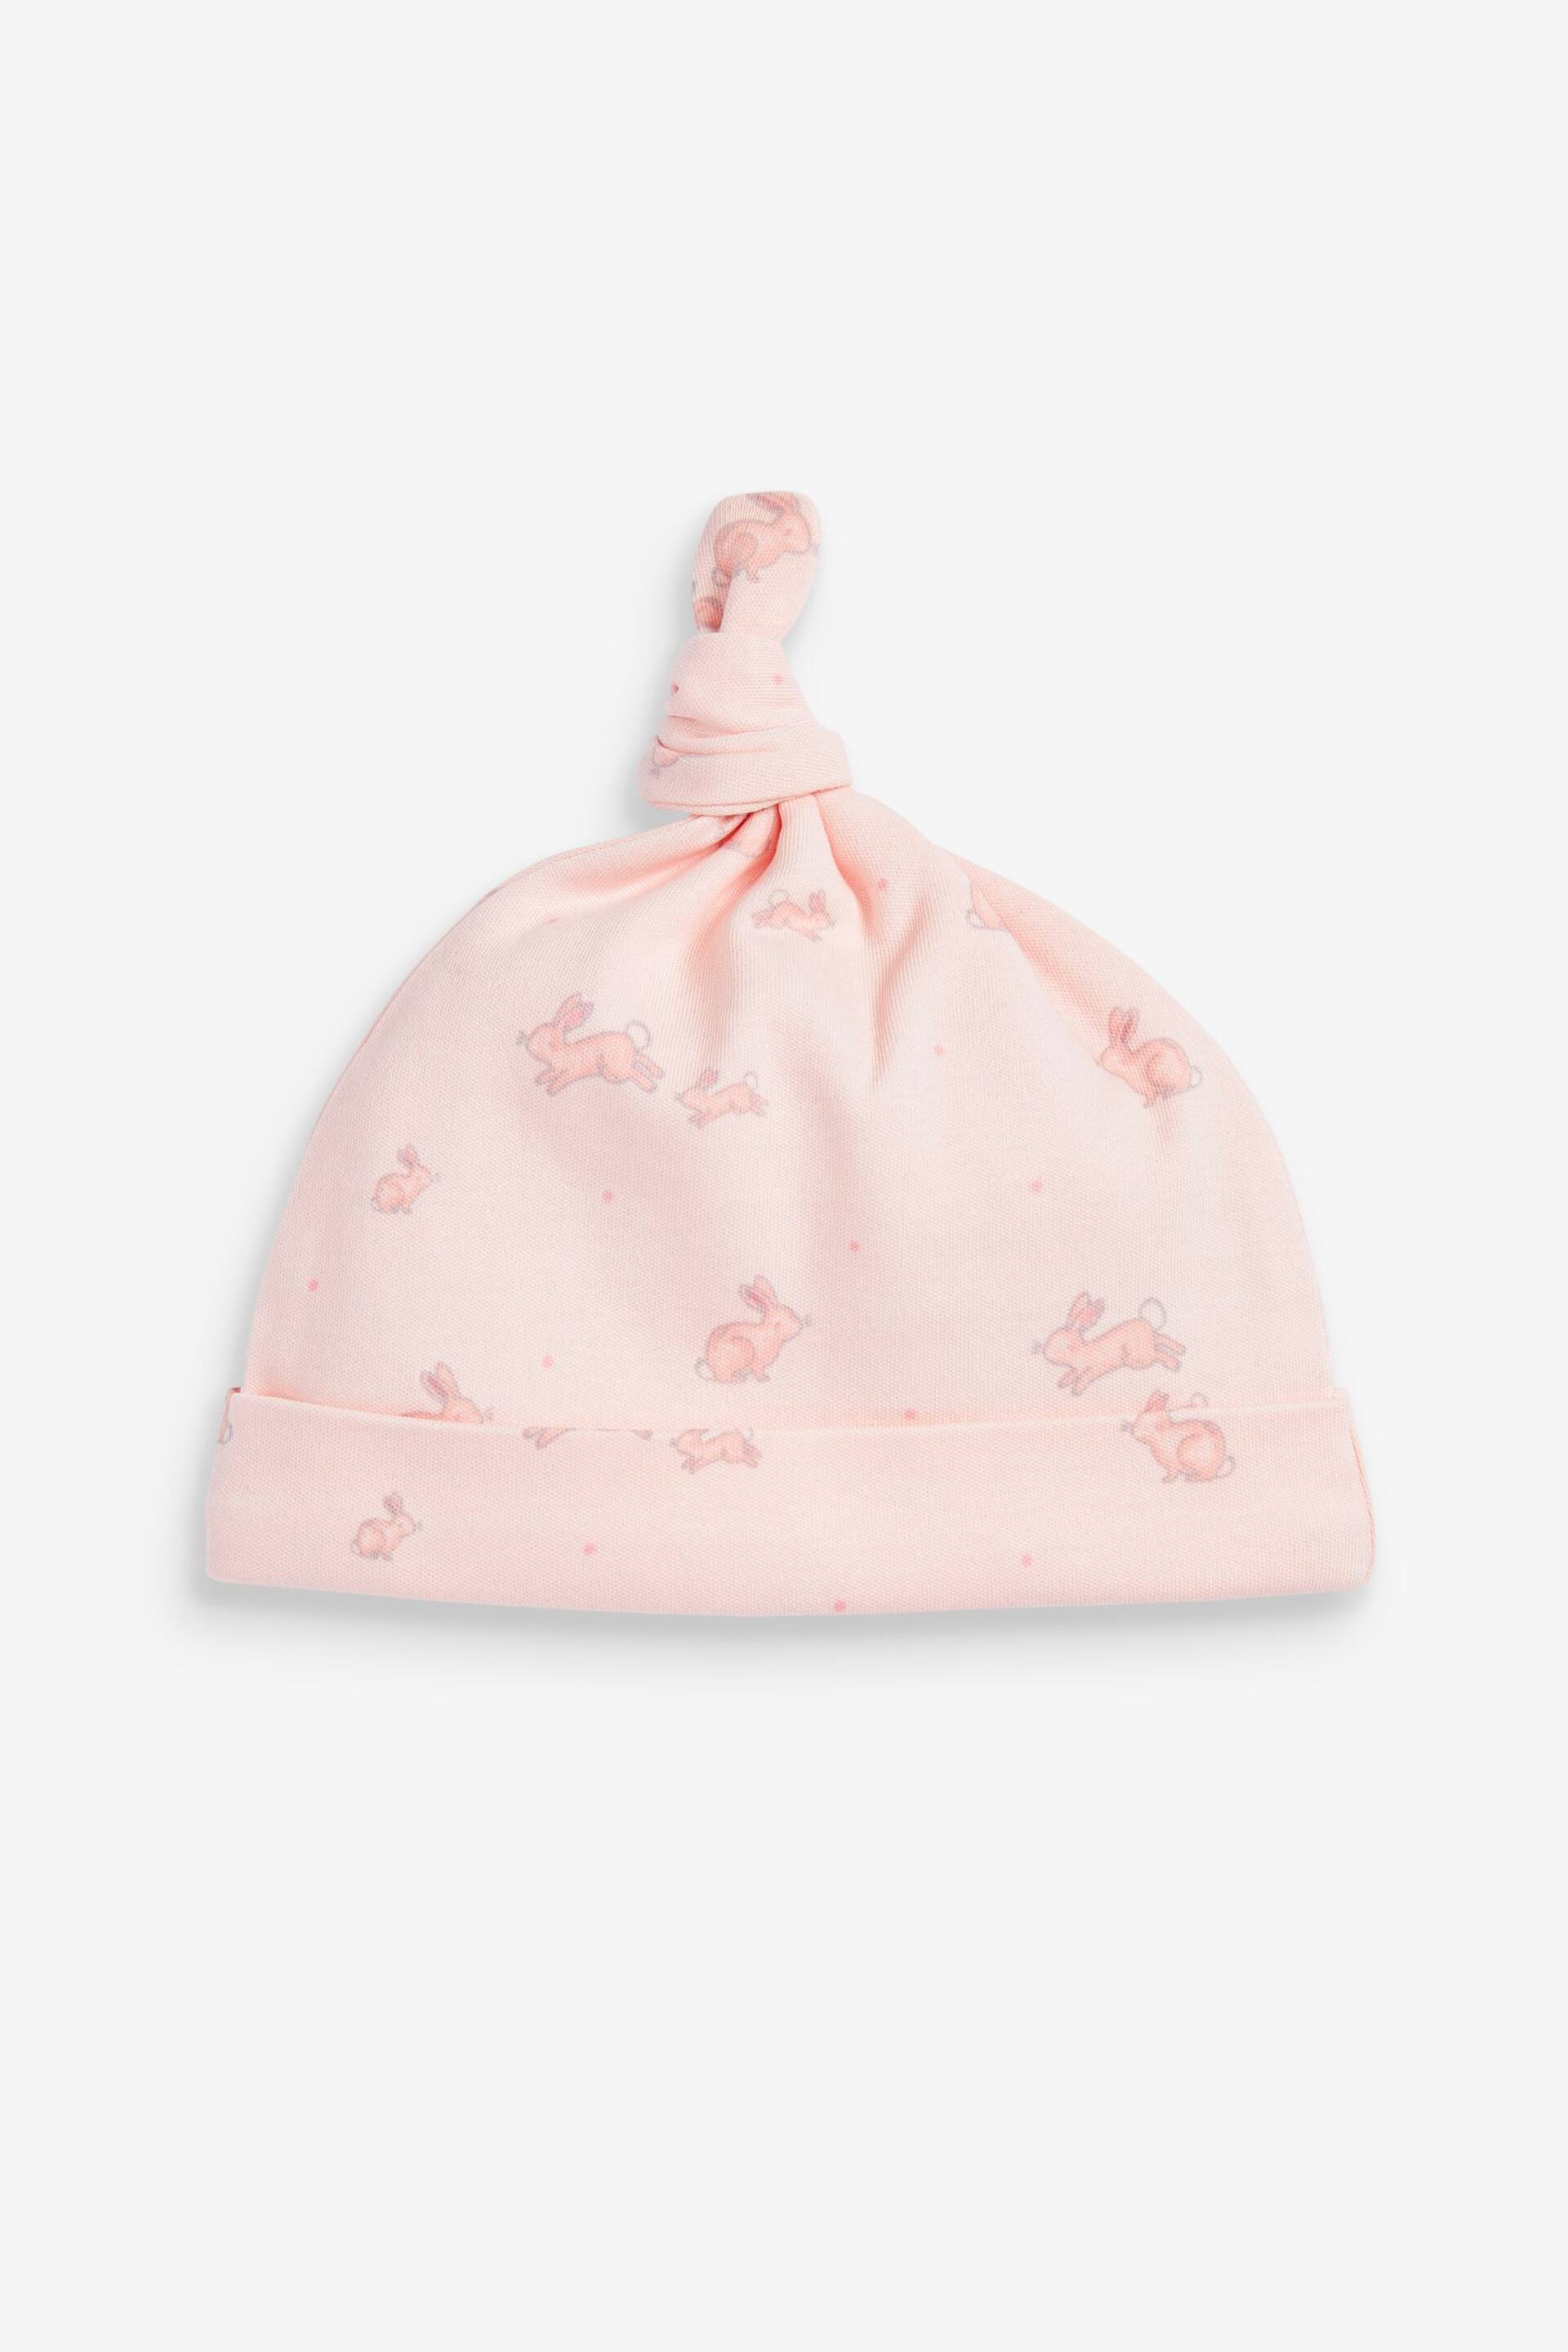 Pale Pink Floral Baby Tie Top Hat 3 Packs (0-18mths) - Image 5 of 5